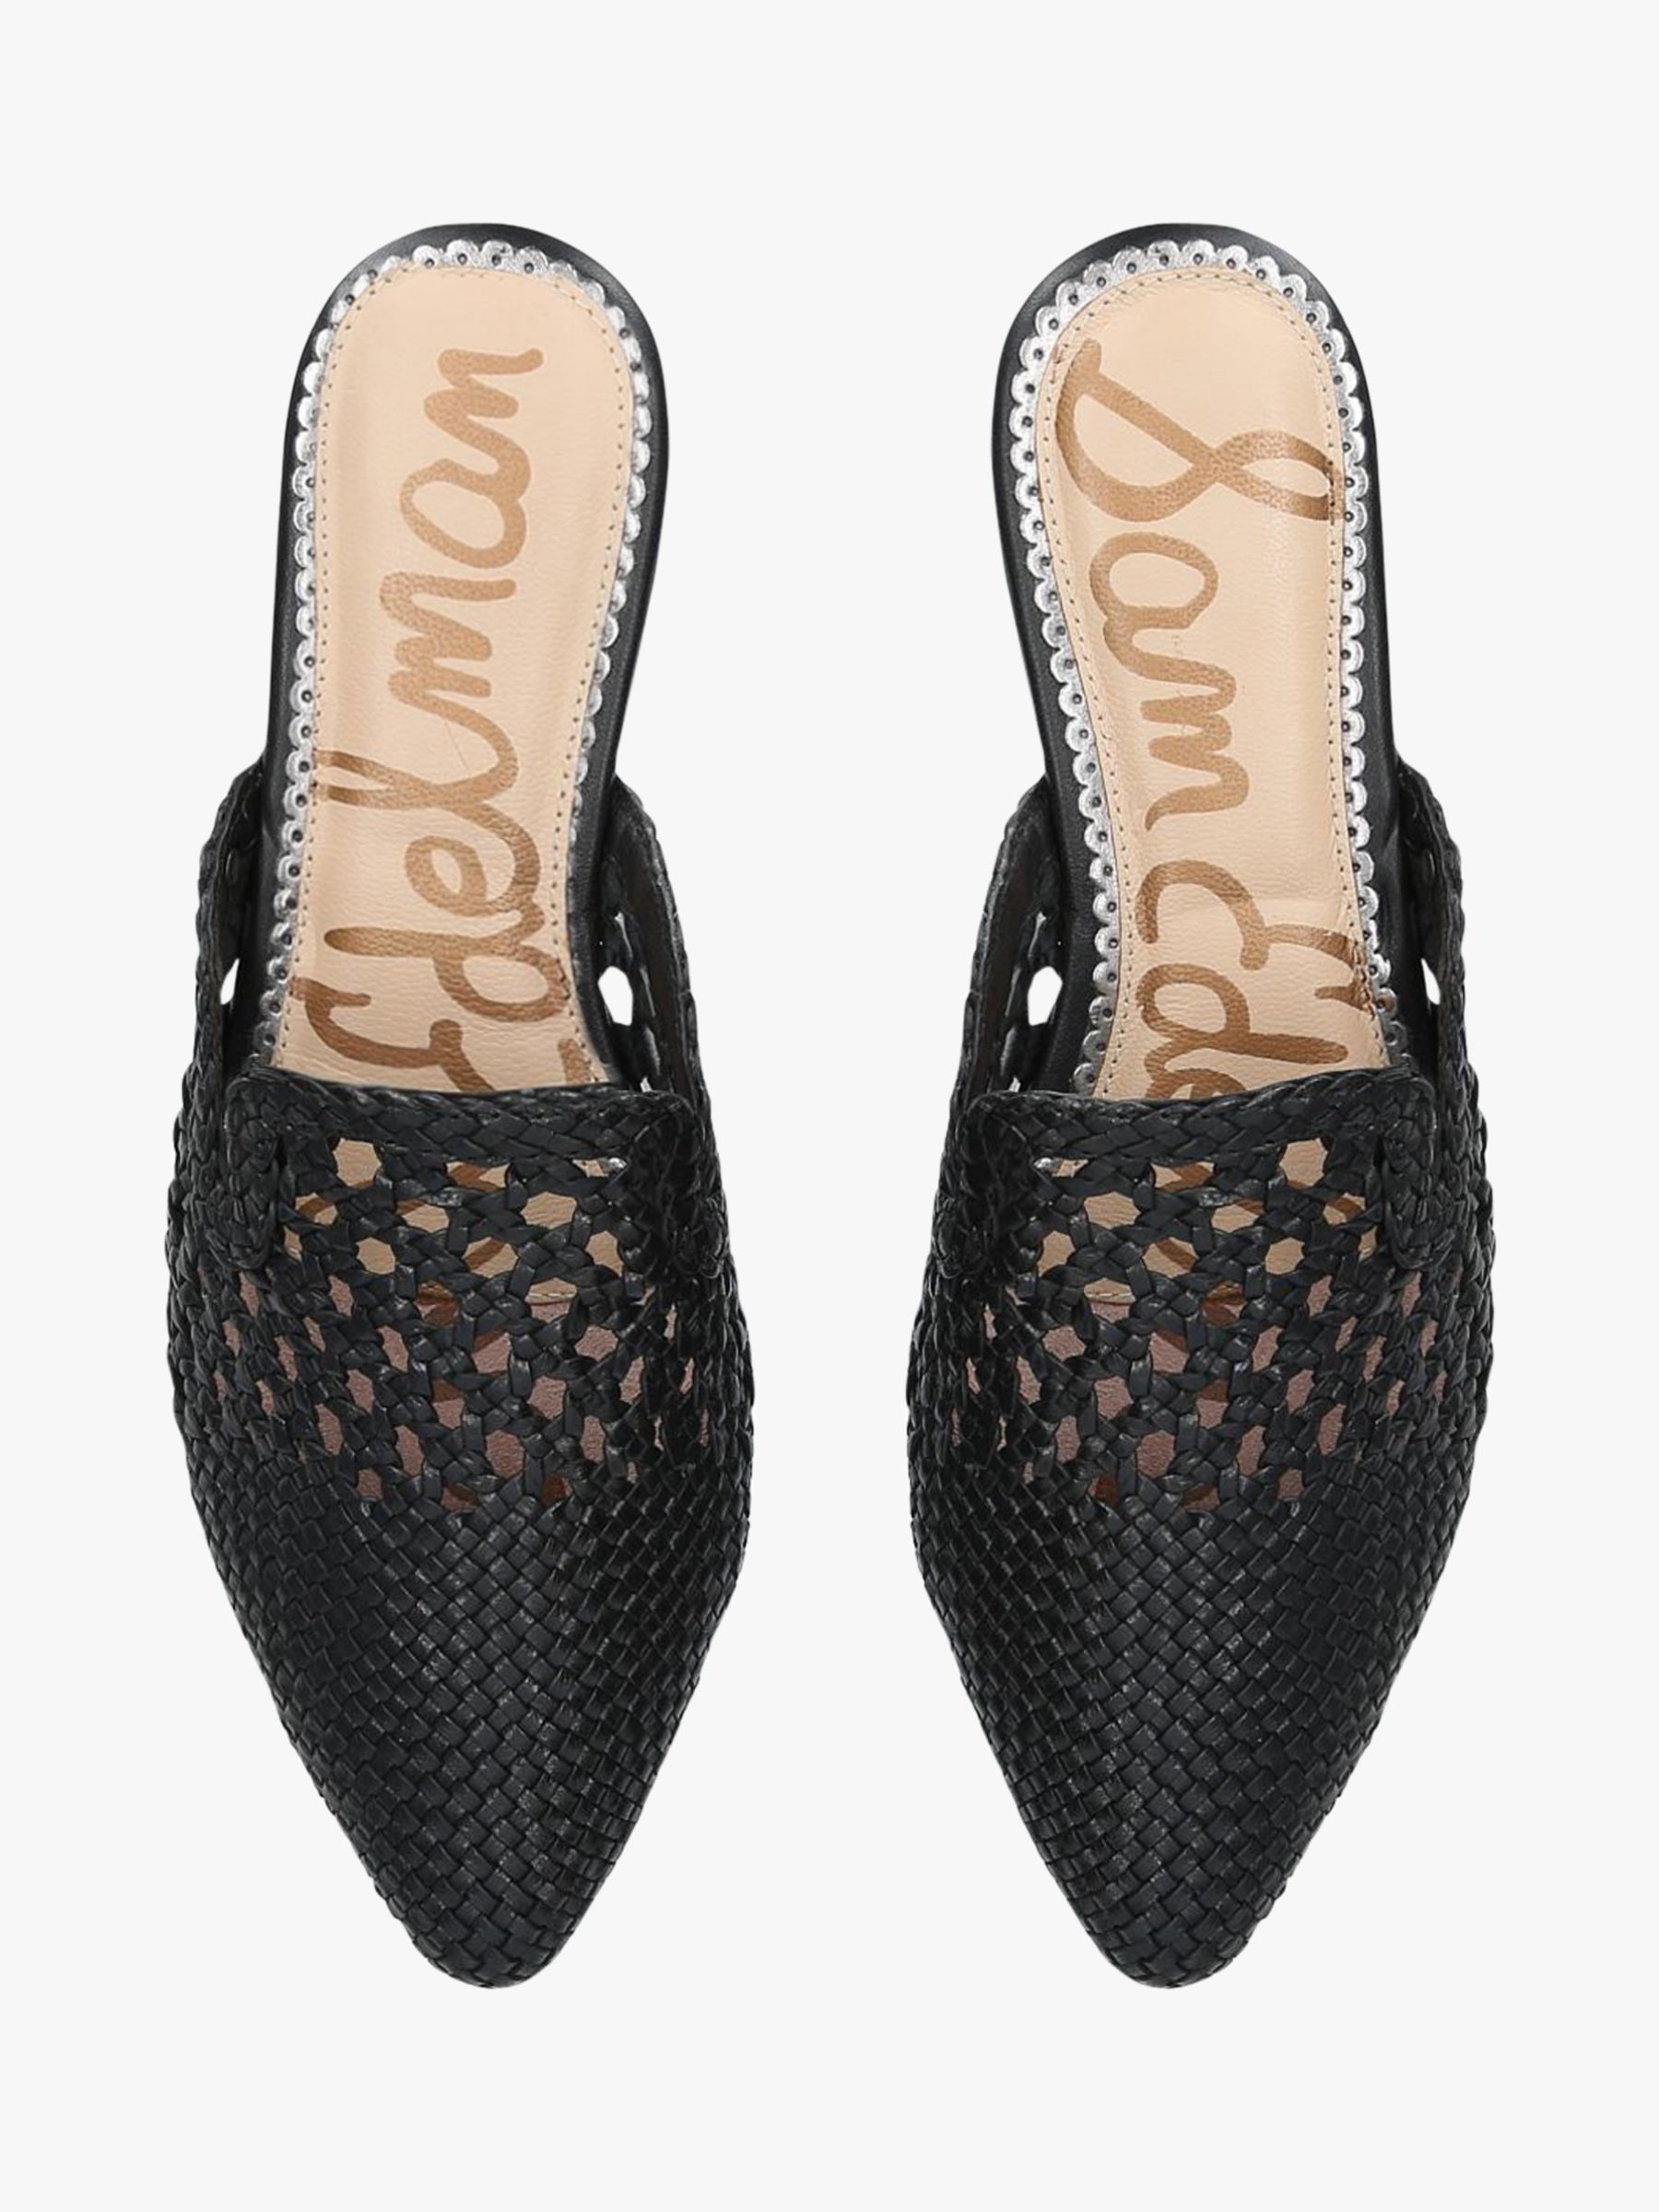 Sam Edelman Clara Pointed Woven Leather Mules at John Lewis & Partners